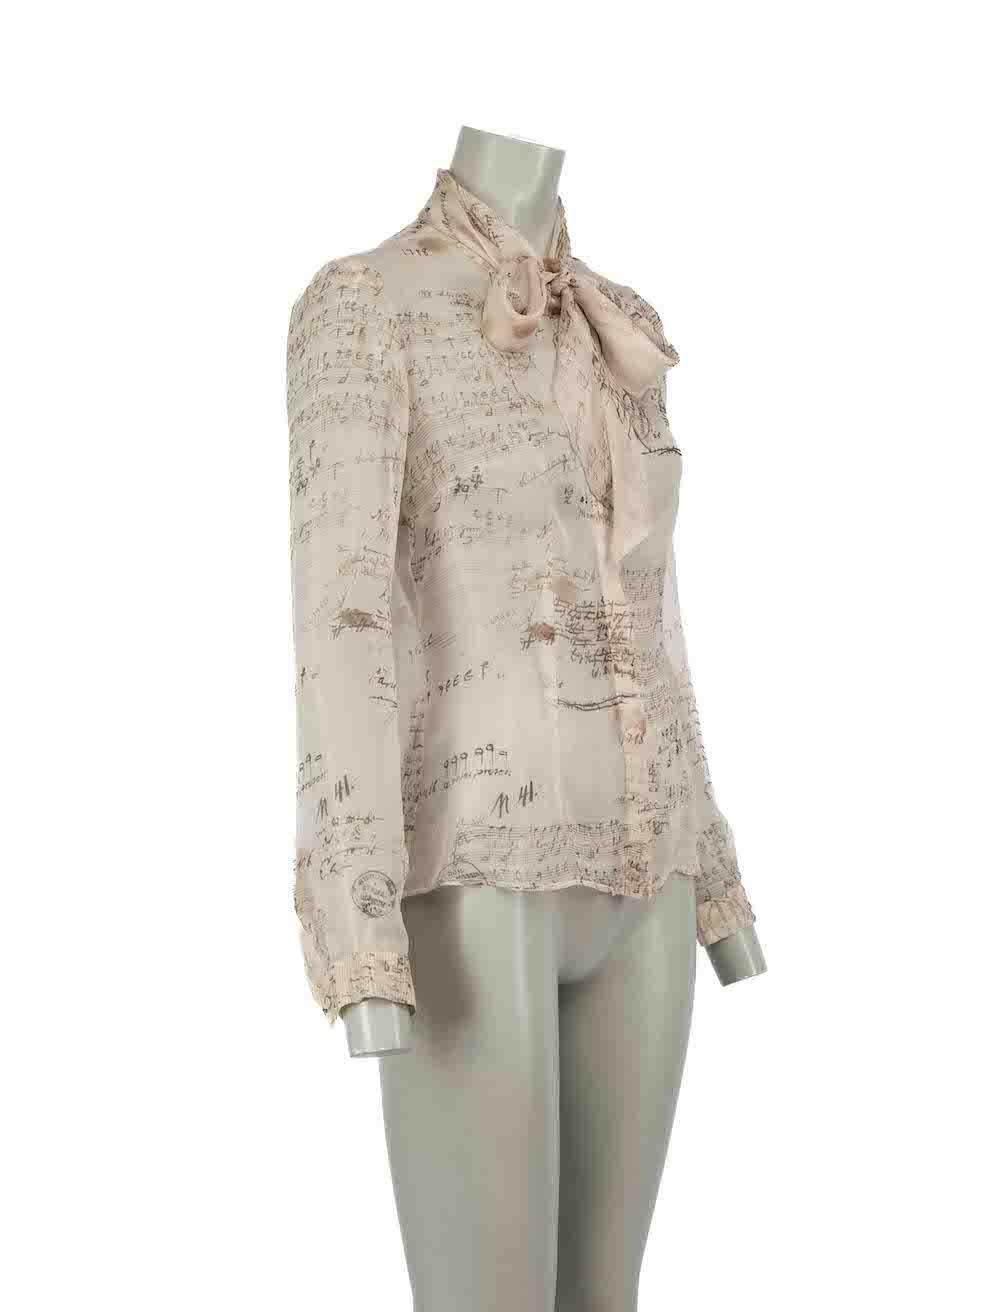 CONDITION is Very good. Minimal wear to blouse is evident. Minimal wear to the lining with the brand label having become detached on one side on this used Alexander McQueen designer resale item.

Details
Beige
Silk
Sheer blouse
Music notes printed